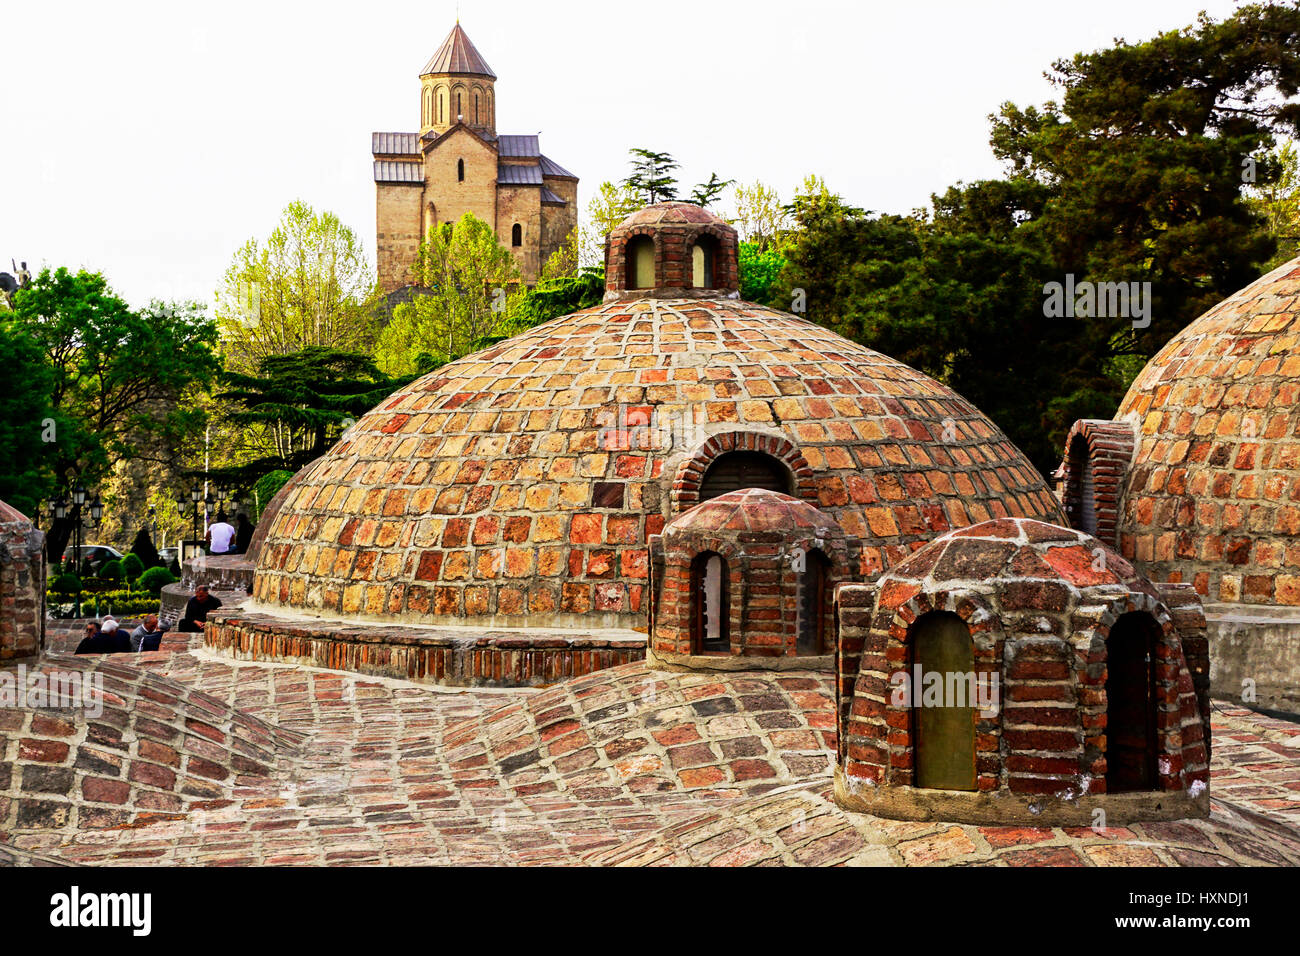 Domed Sulphur Baths with Metekhi Church (Church of Assumption) in background. Stock Photo